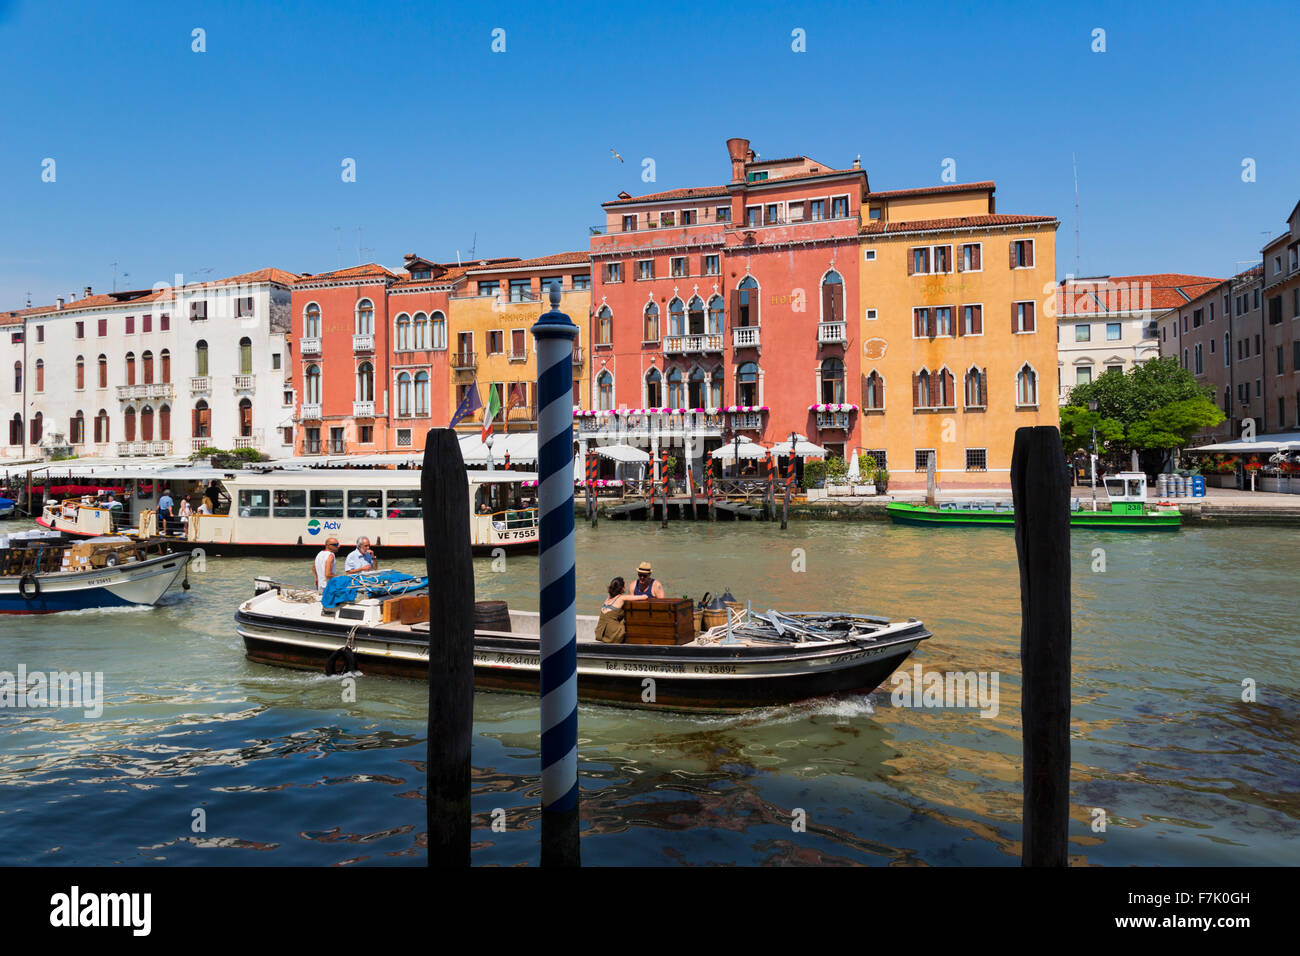 Venice, Italy.  Traffic on the Grand Canal.  Boats delivering goods.  In background, a vaporetto, or waterbus. Stock Photo